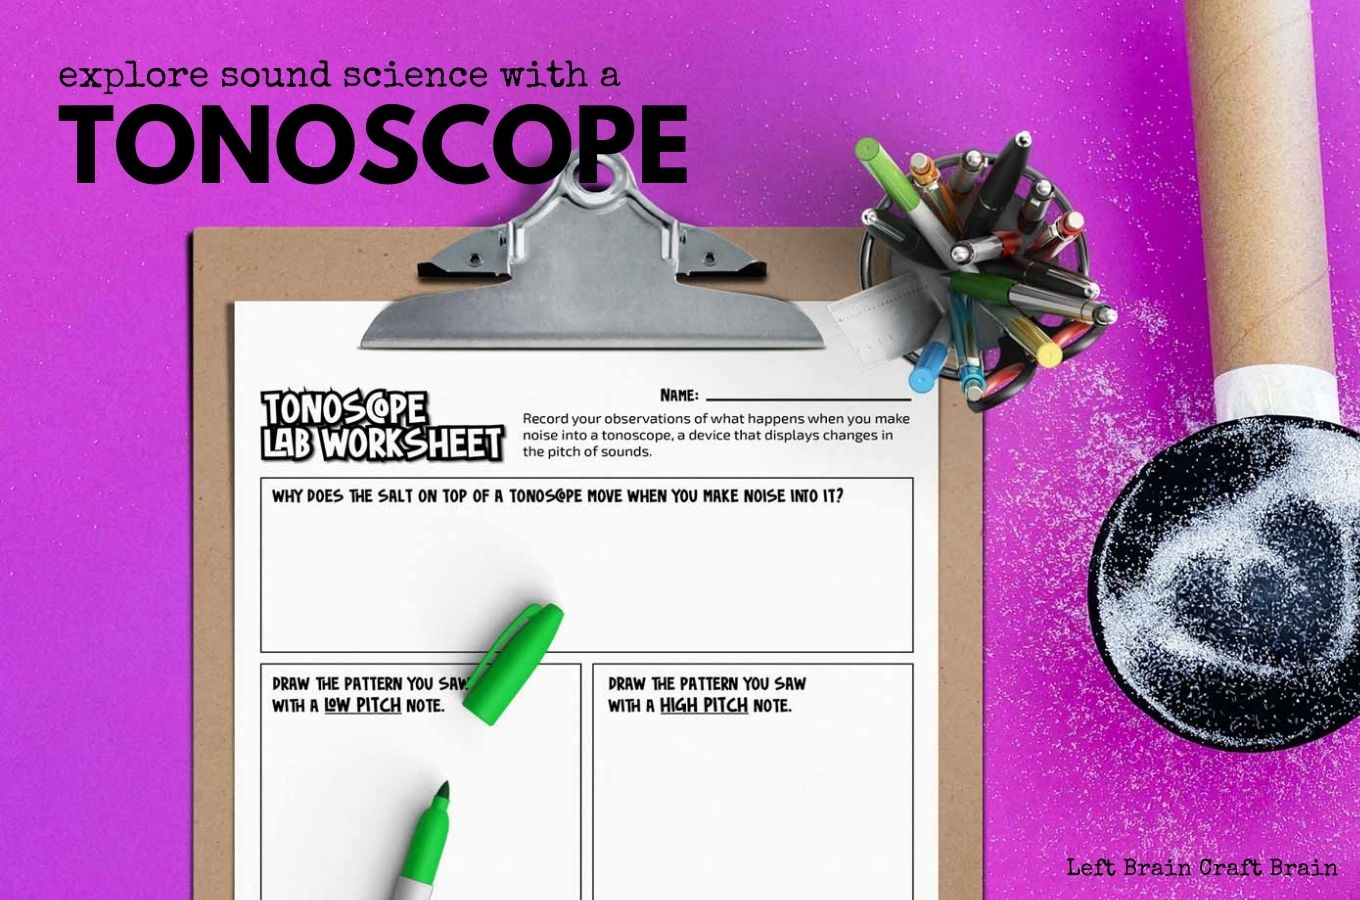 See sound with a tonoscope worksheet 1360x900